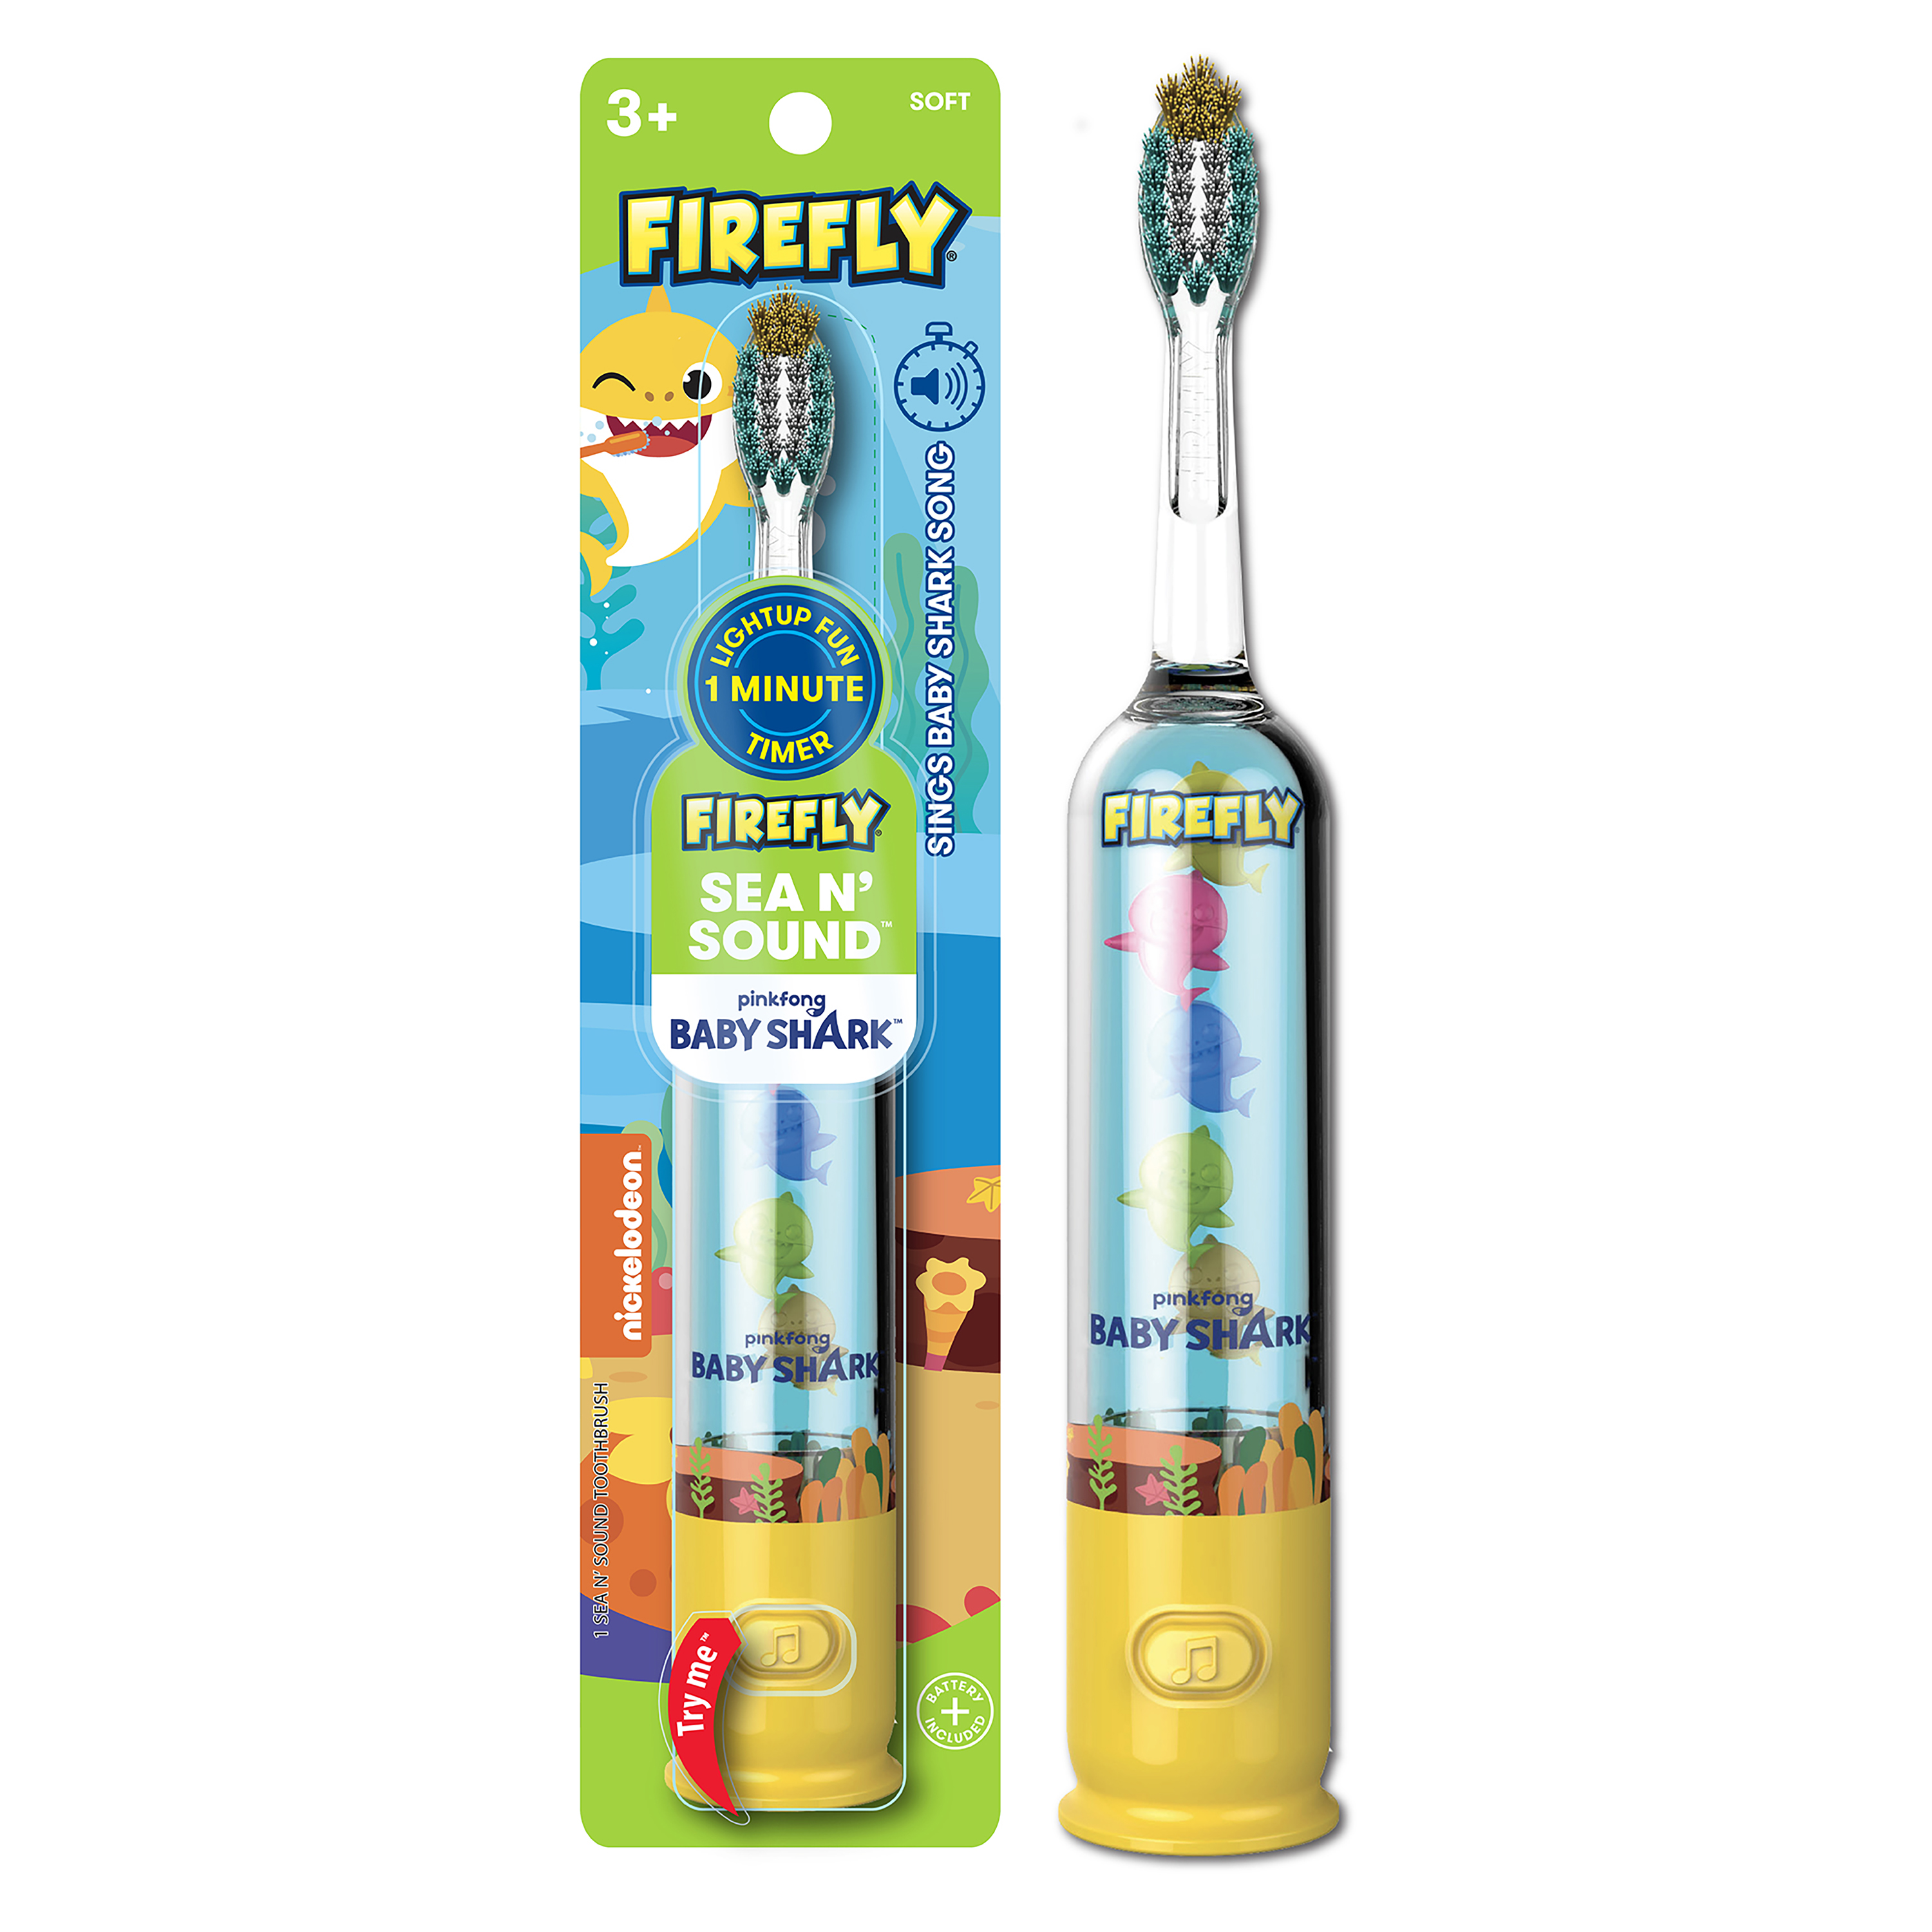 Firefly Sea N' Sound, Baby Shark Toothbrush, Premium Soft Bristles, Ages 3+, 1 Count - image 1 of 10